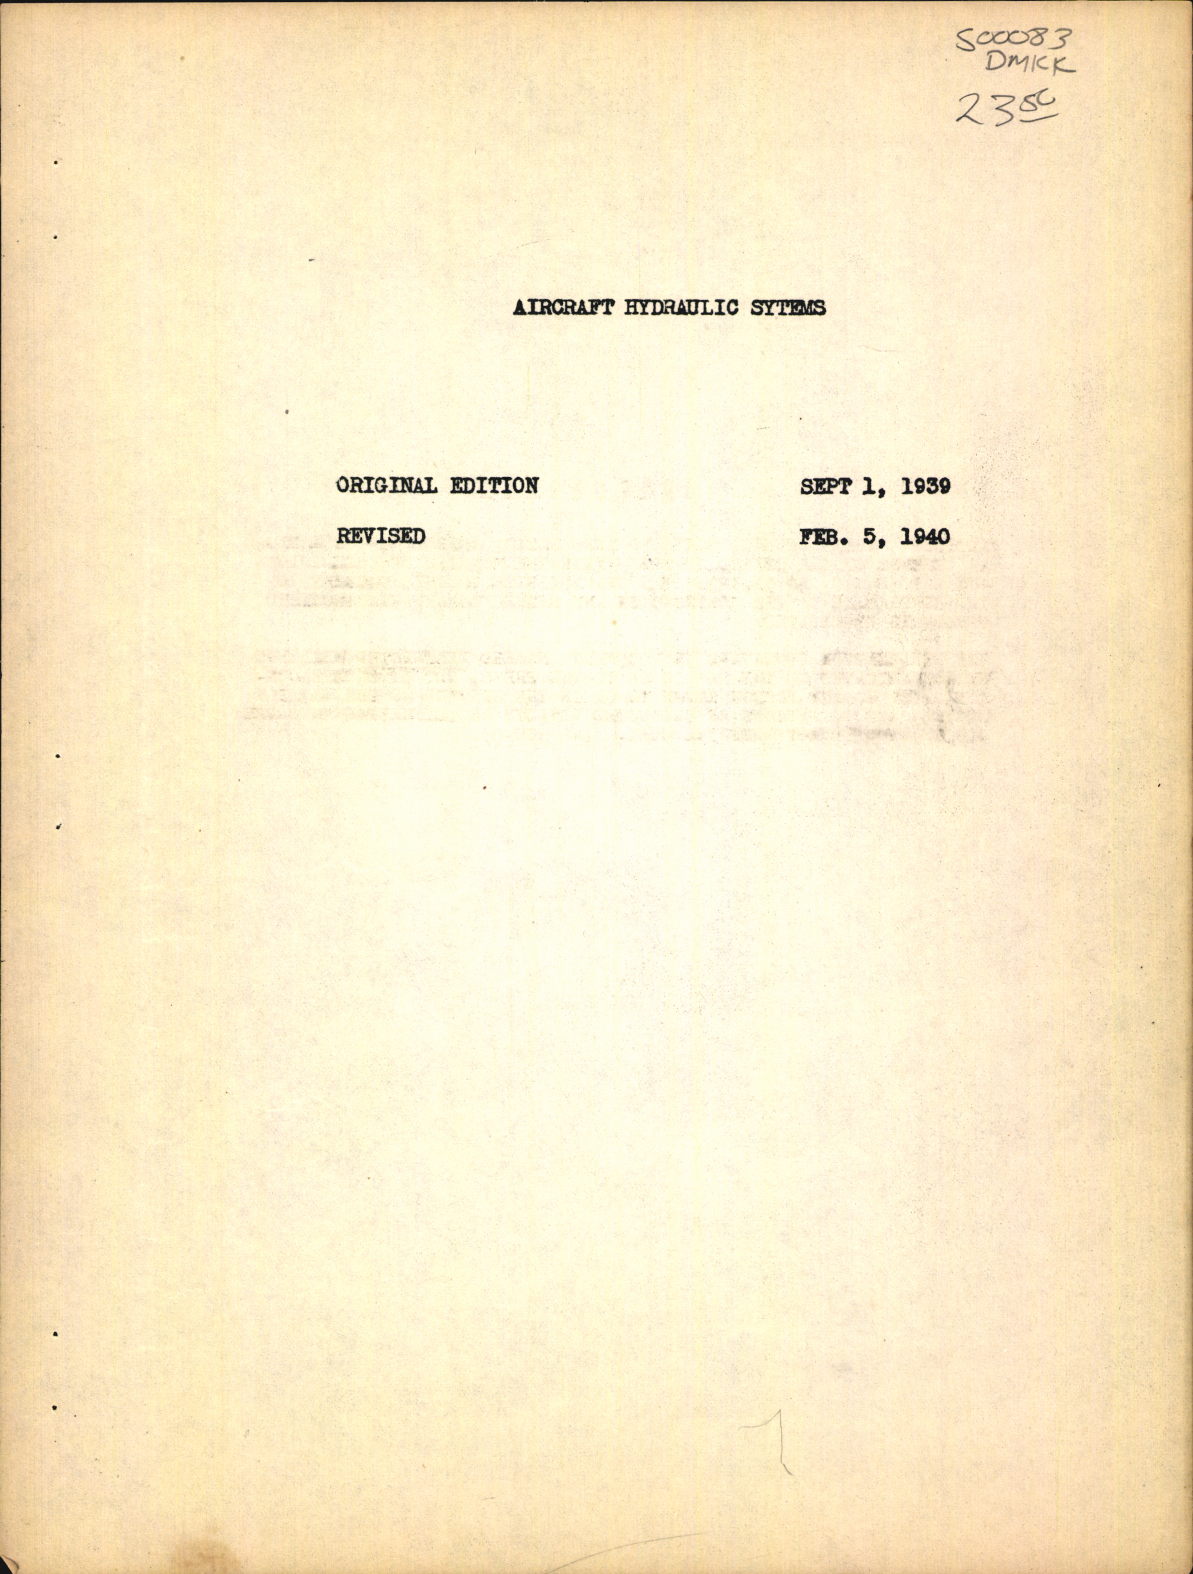 Sample page 5 from AirCorps Library document: Air Corps Technical Schools; Aircraft Hydraulic Systems